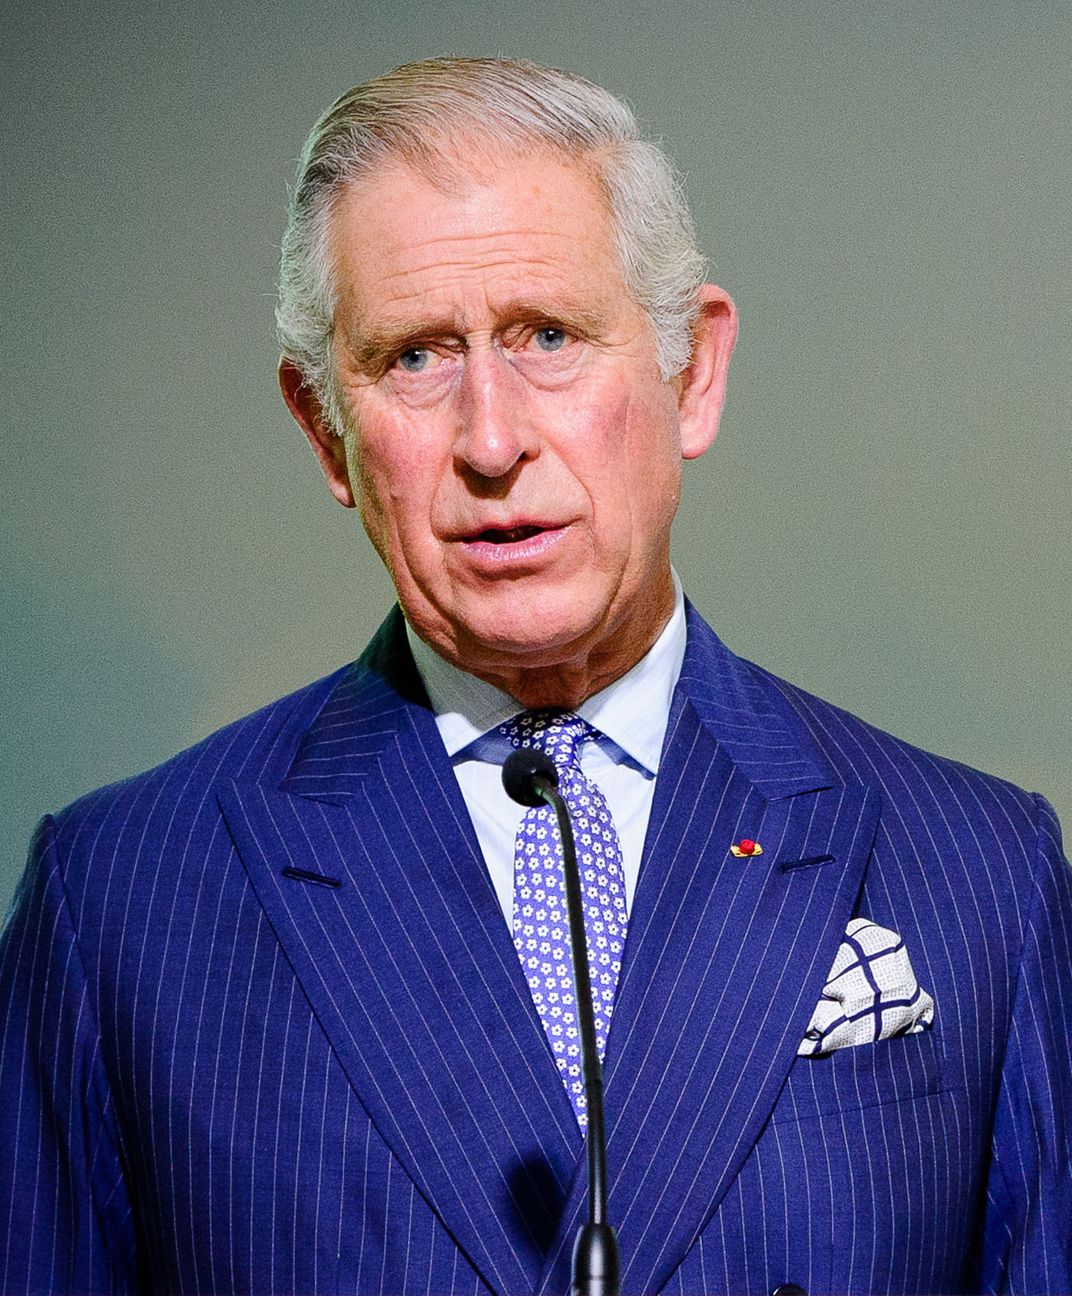 picture of elderly white man in blue pinstripe suit and purple tie with white flowers